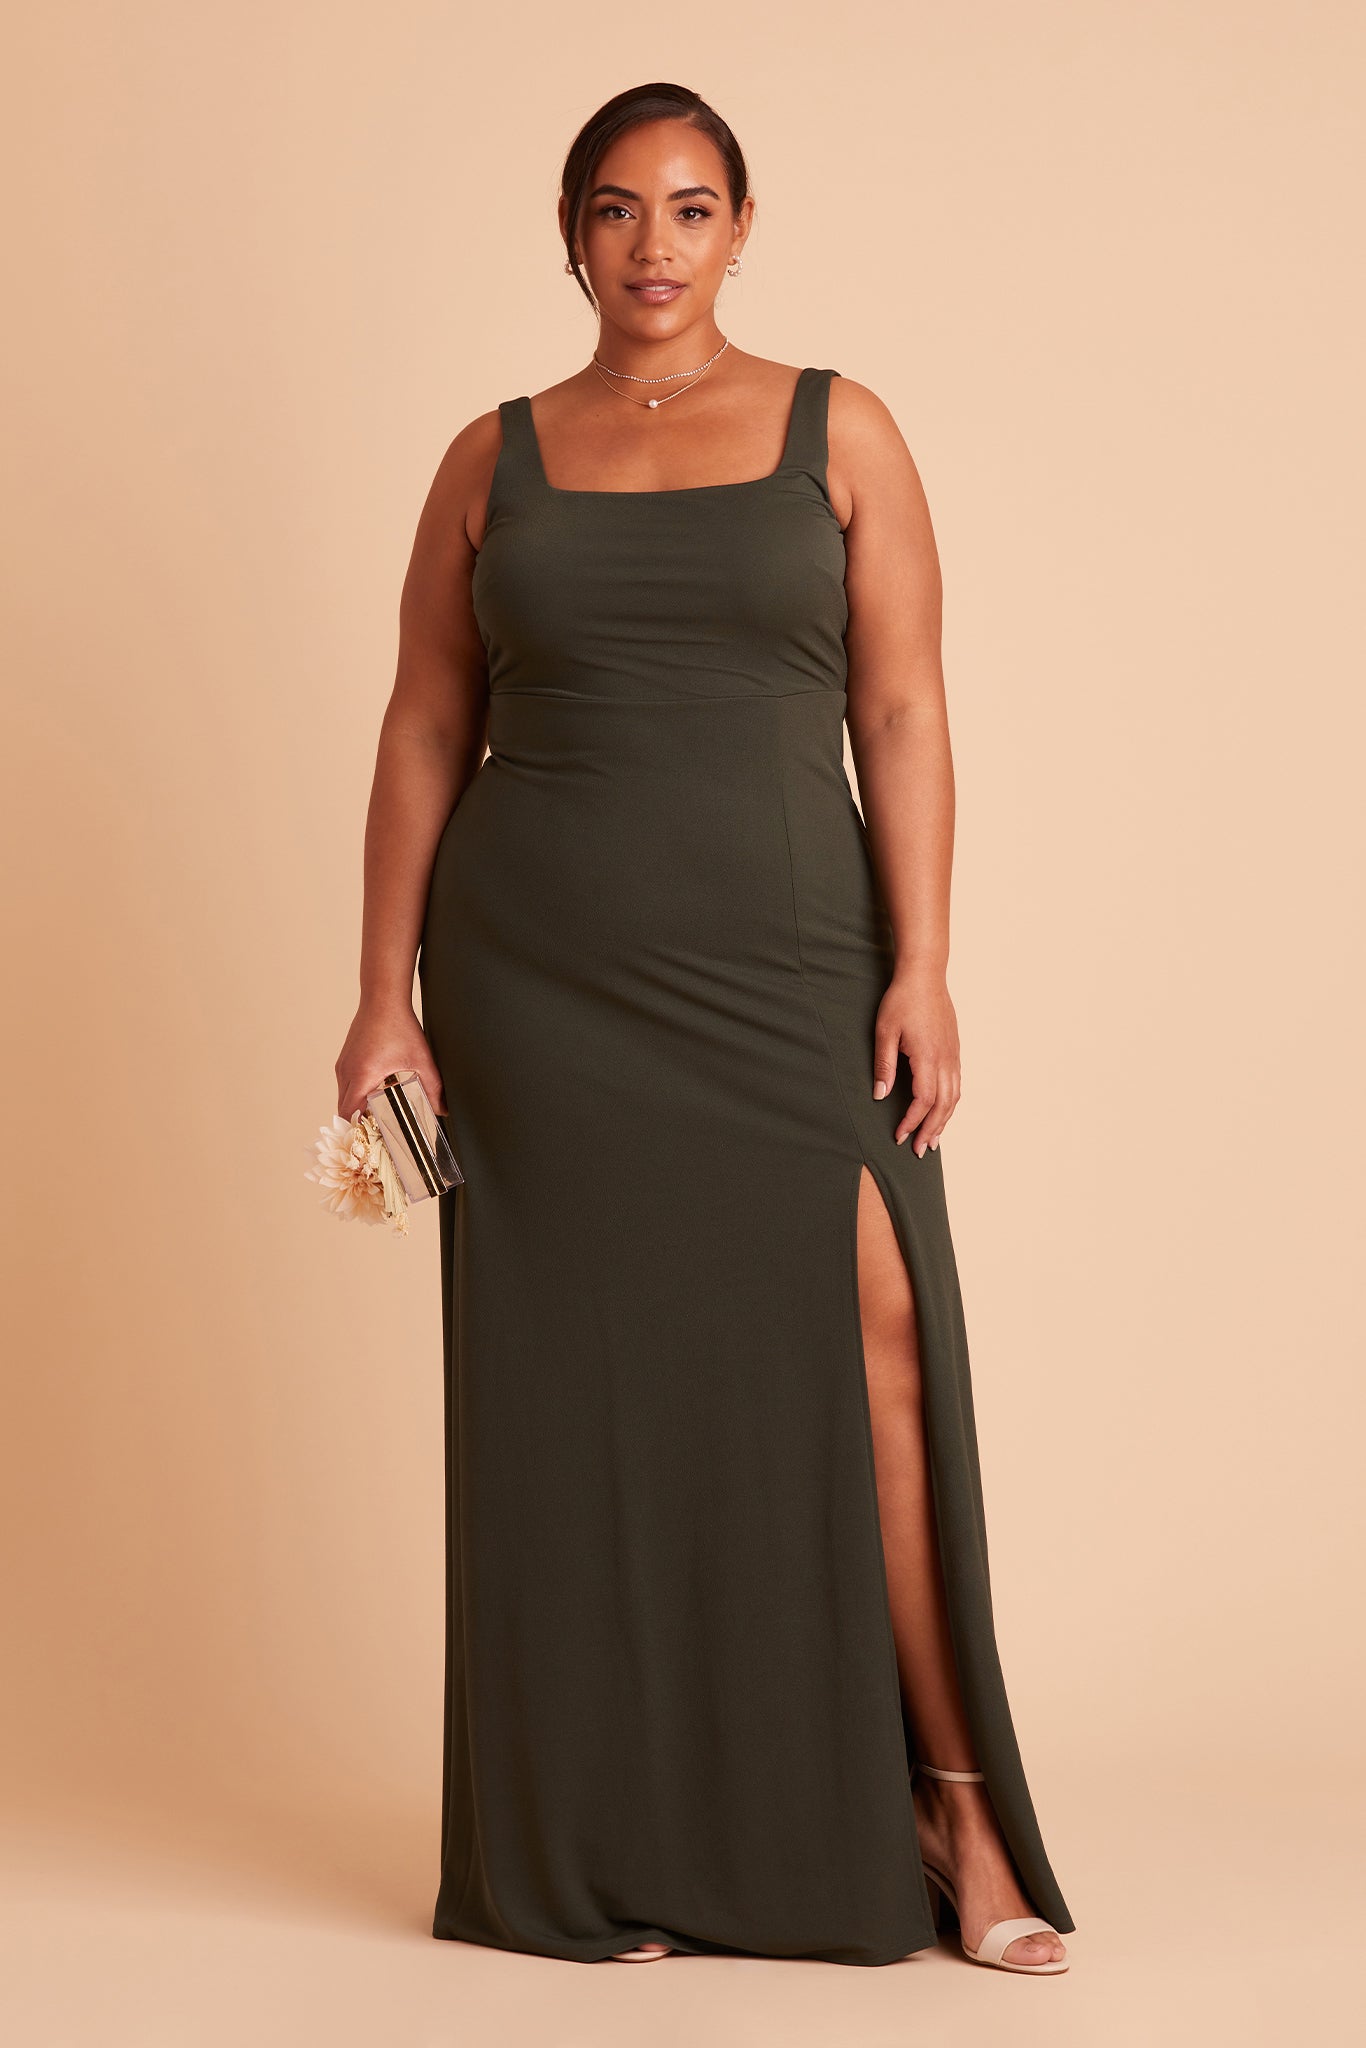 Alex convertible plus size bridesmaid dress with slit in olive crepe by Birdy Grey, front view